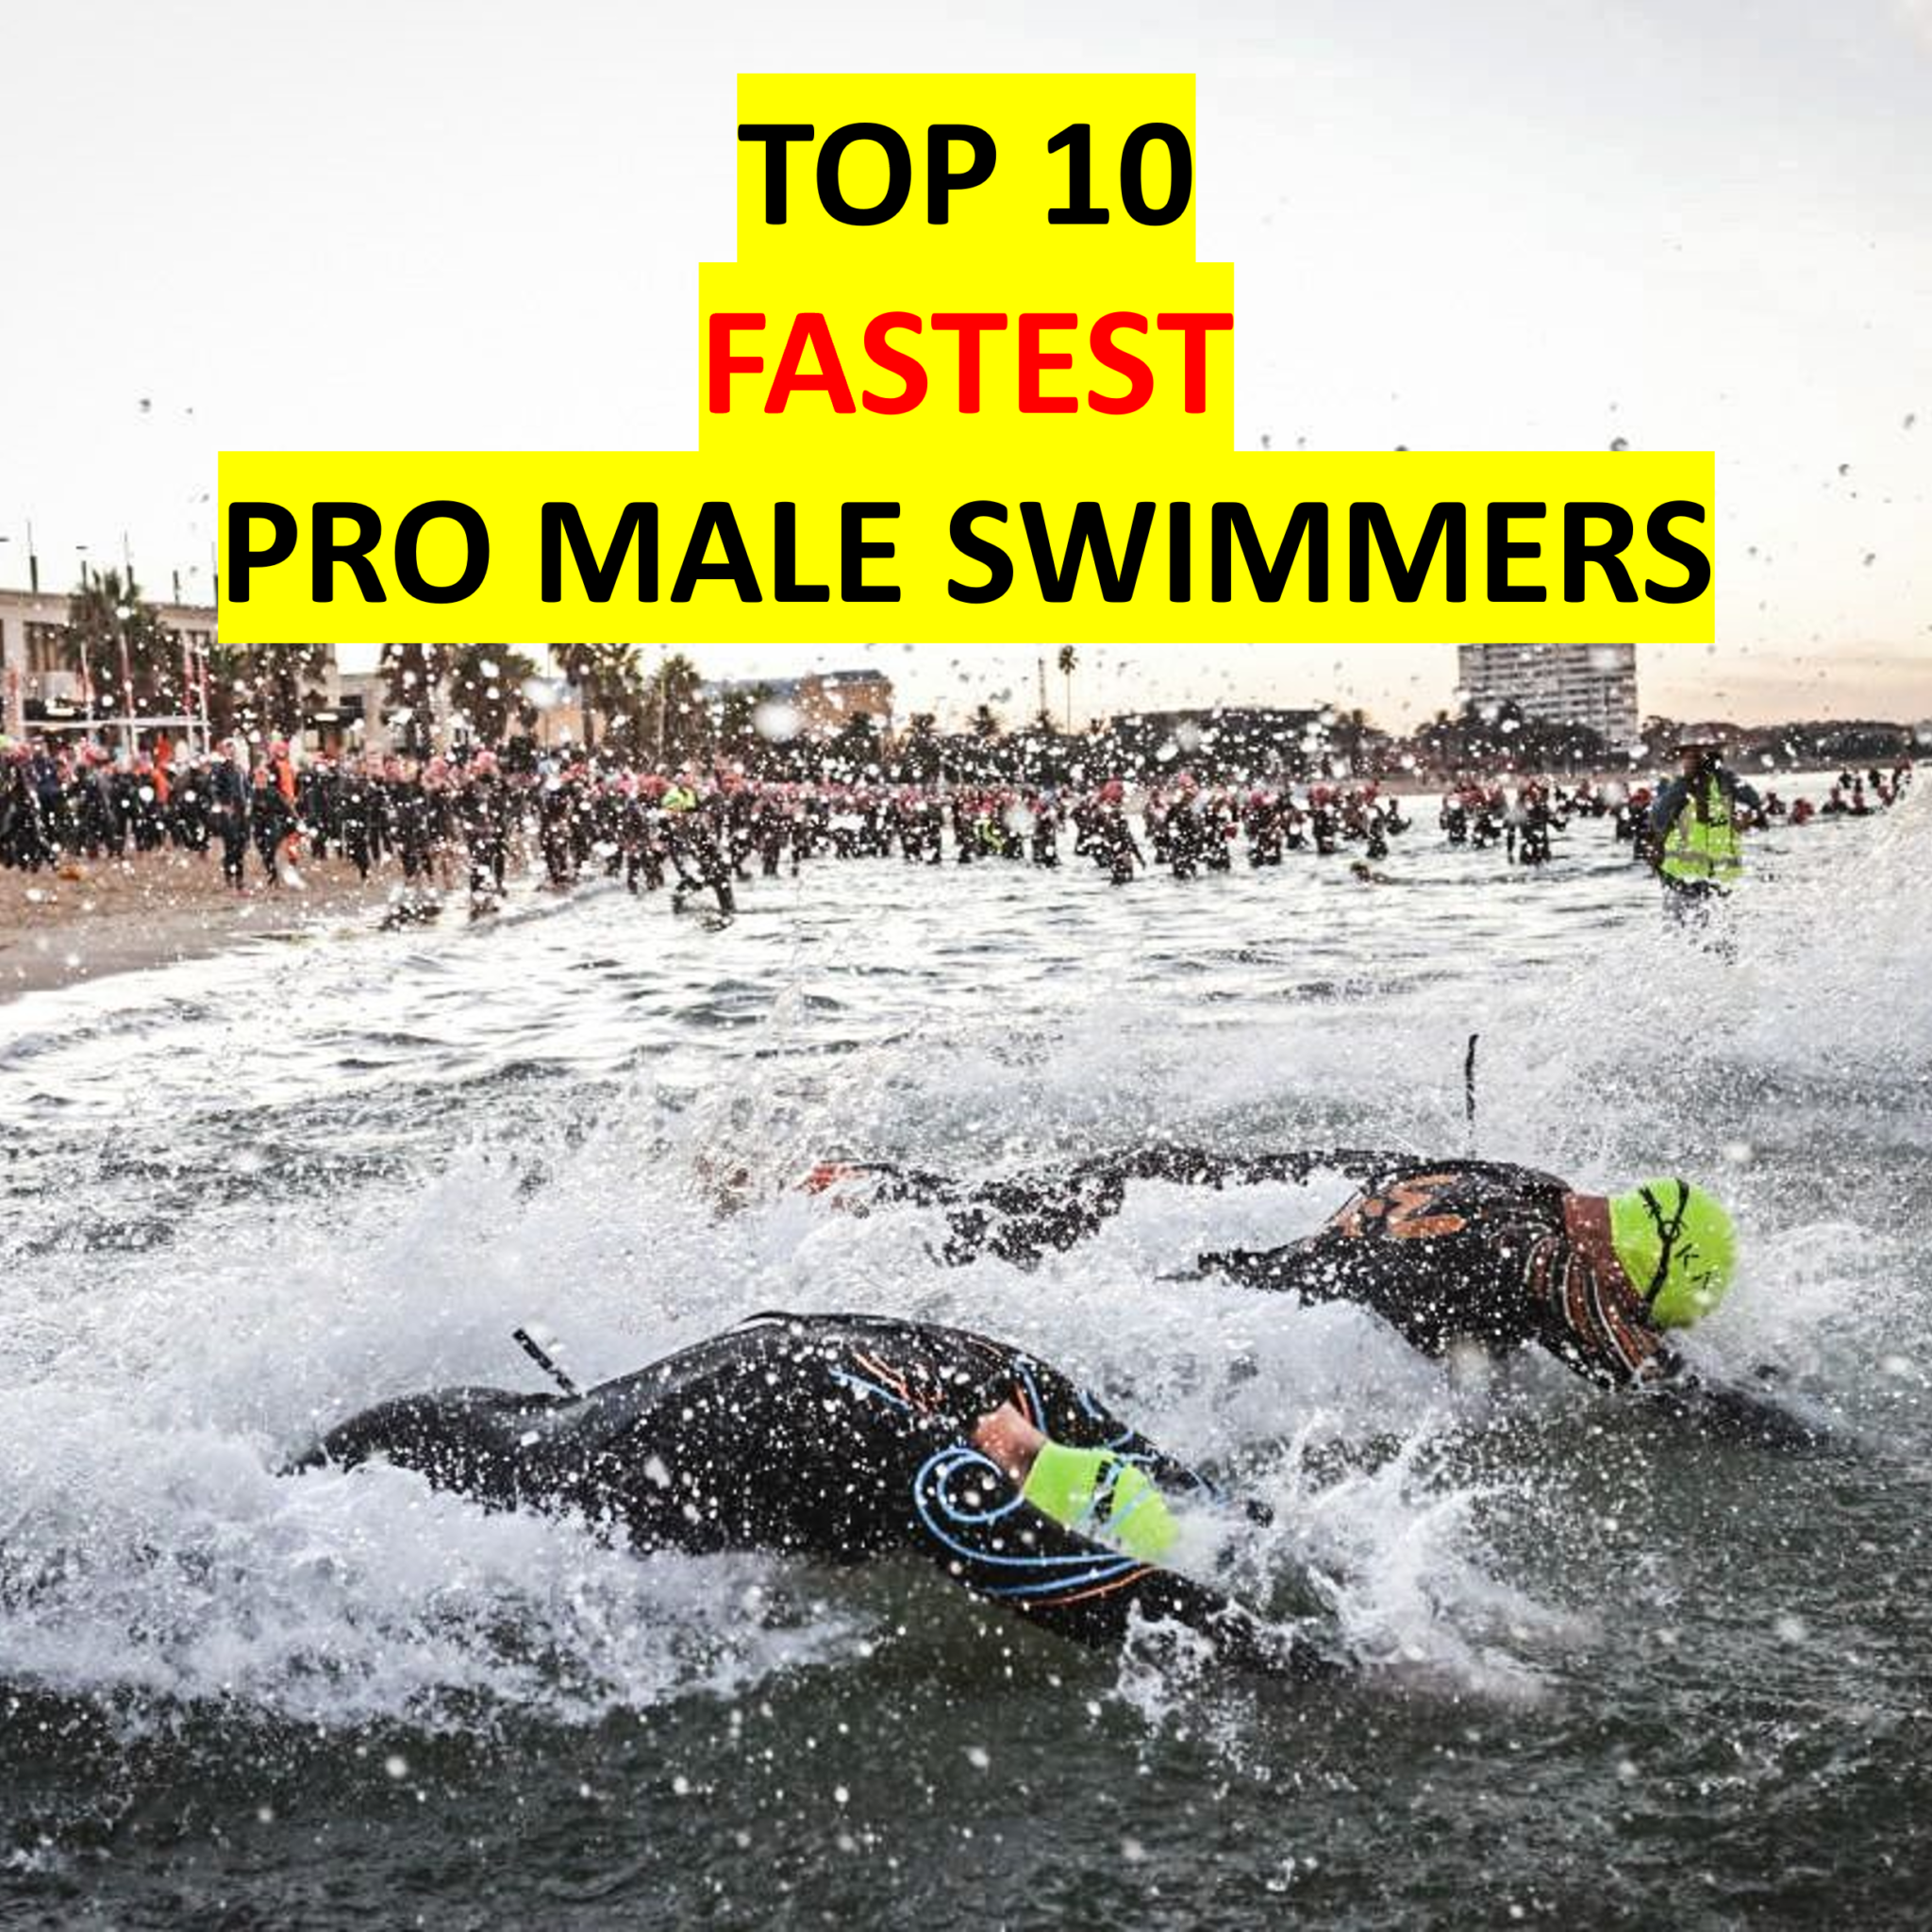 Top 10 Pro Male Swimmers